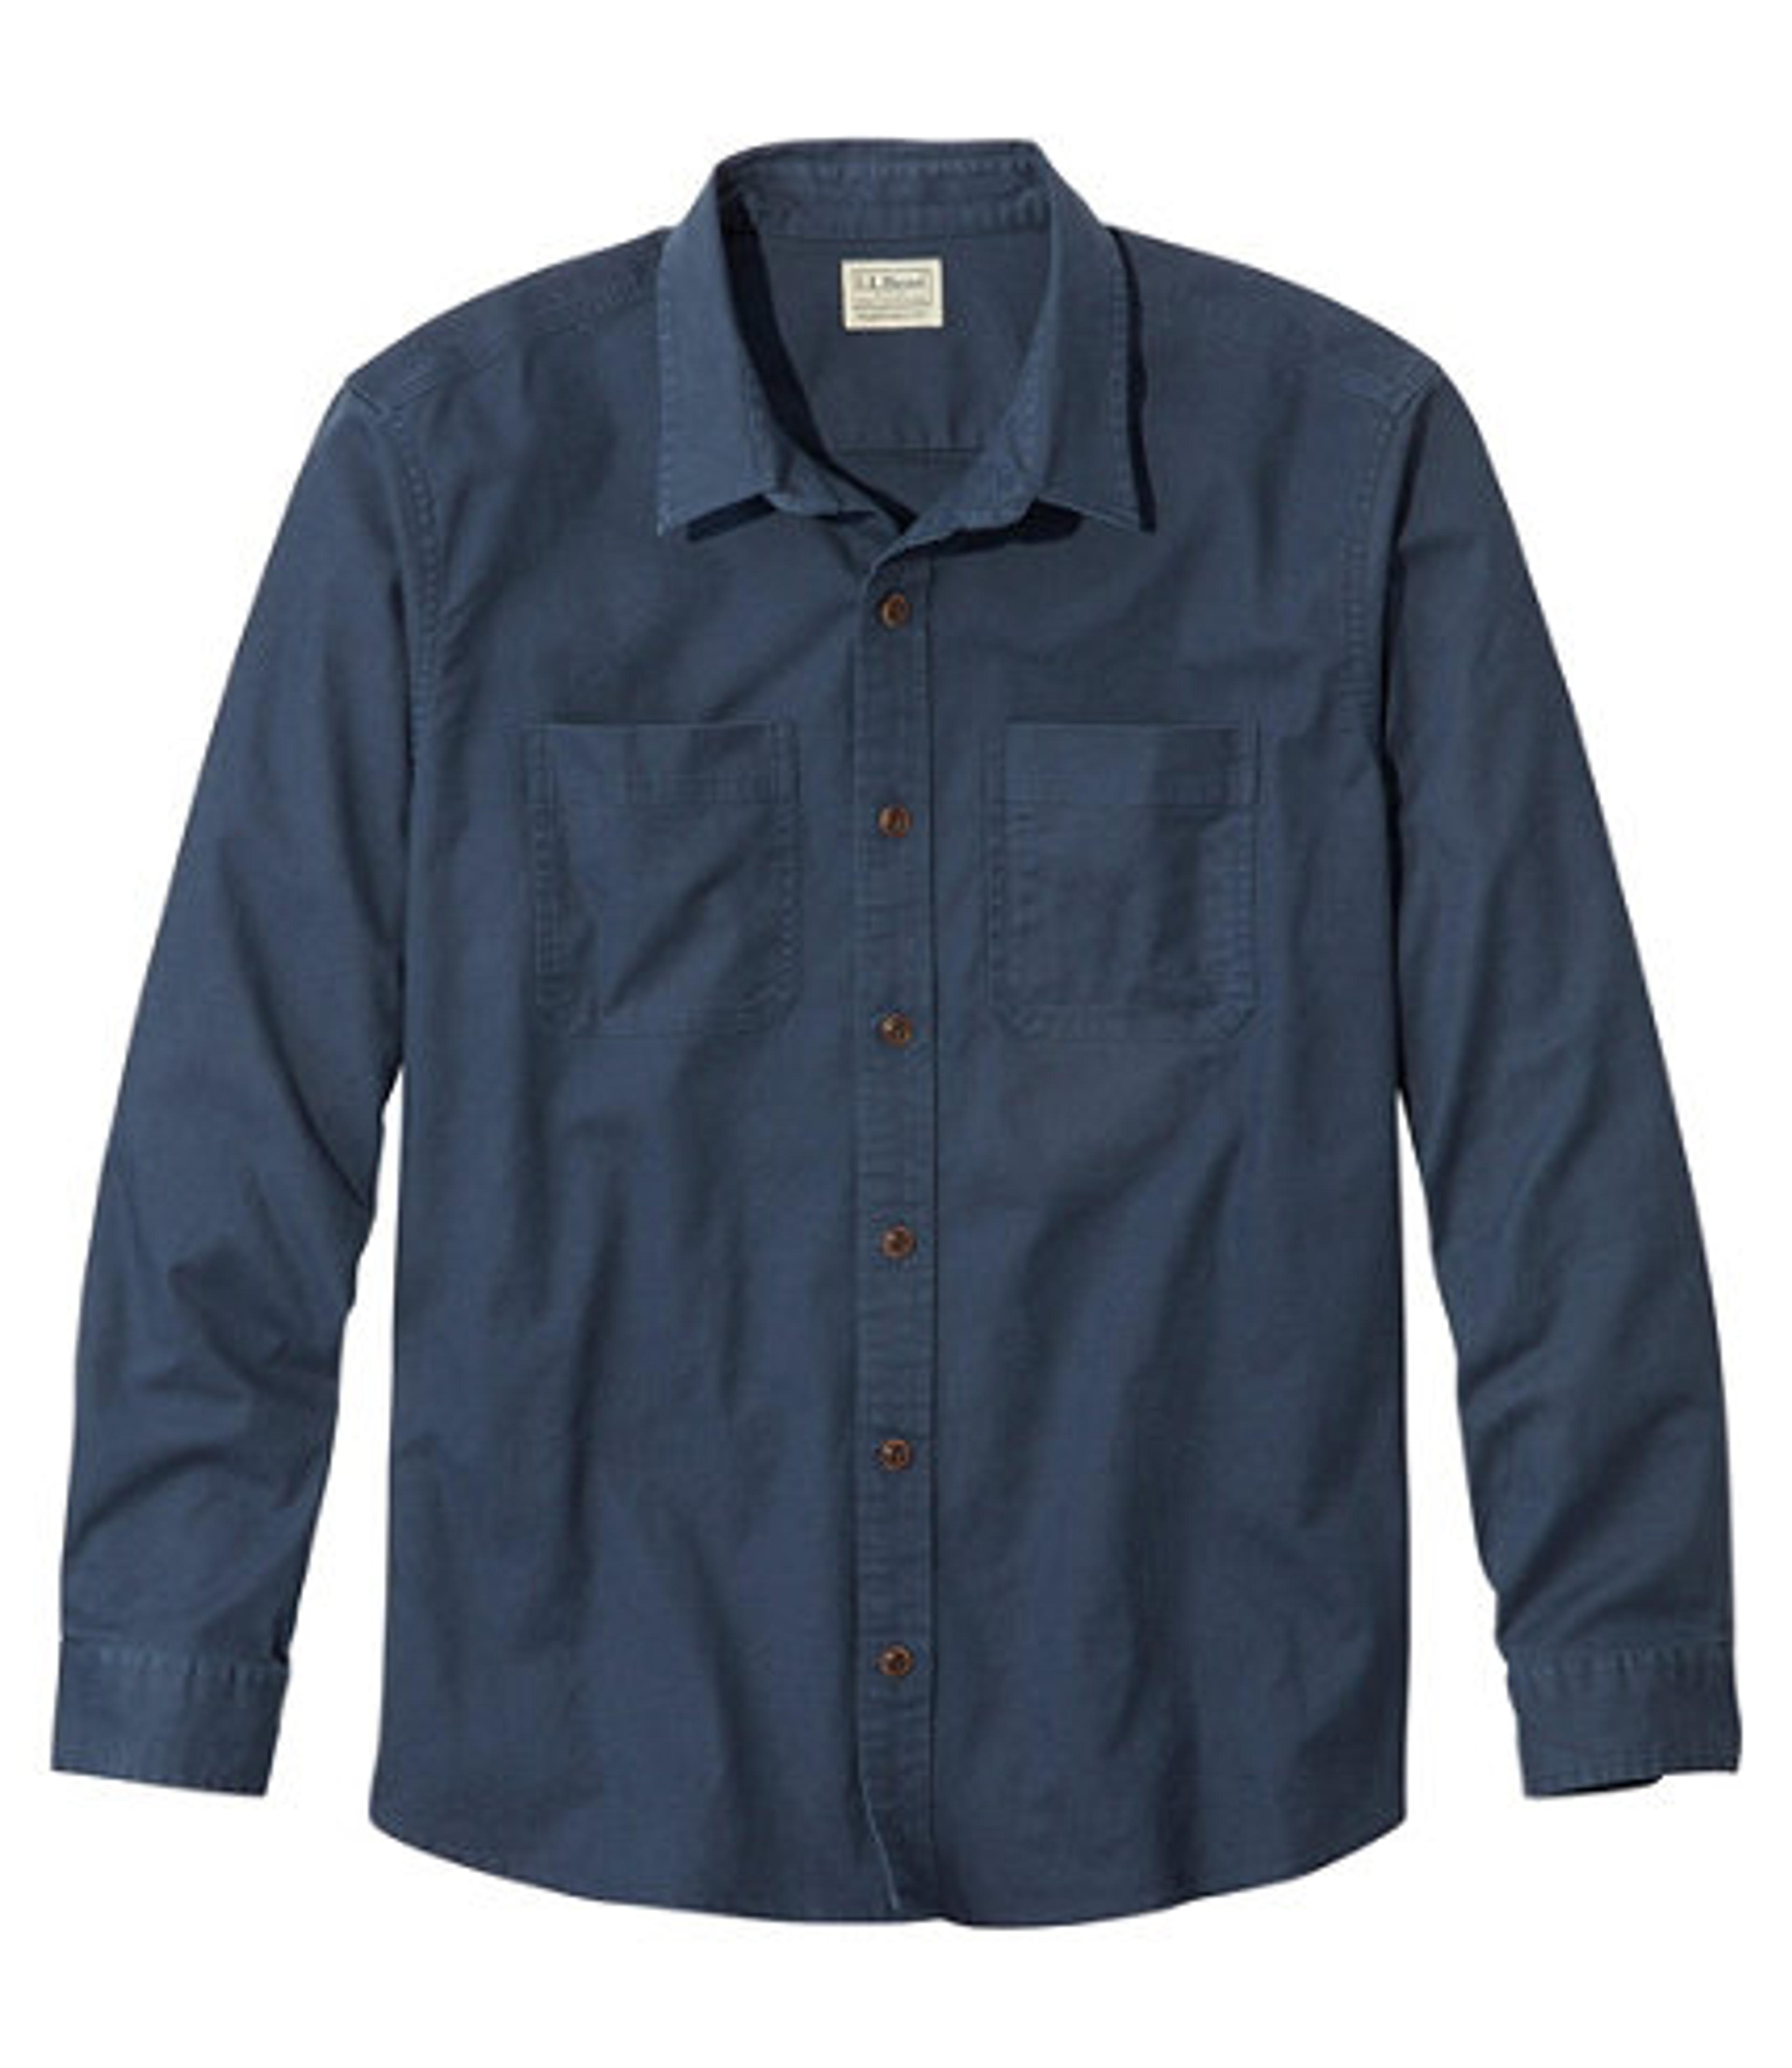 Men's BeanFlex Twill Shirt, Traditional Untucked Fit, Long-Sleeve | Casual Button-Down Shirts at L.L.Bean